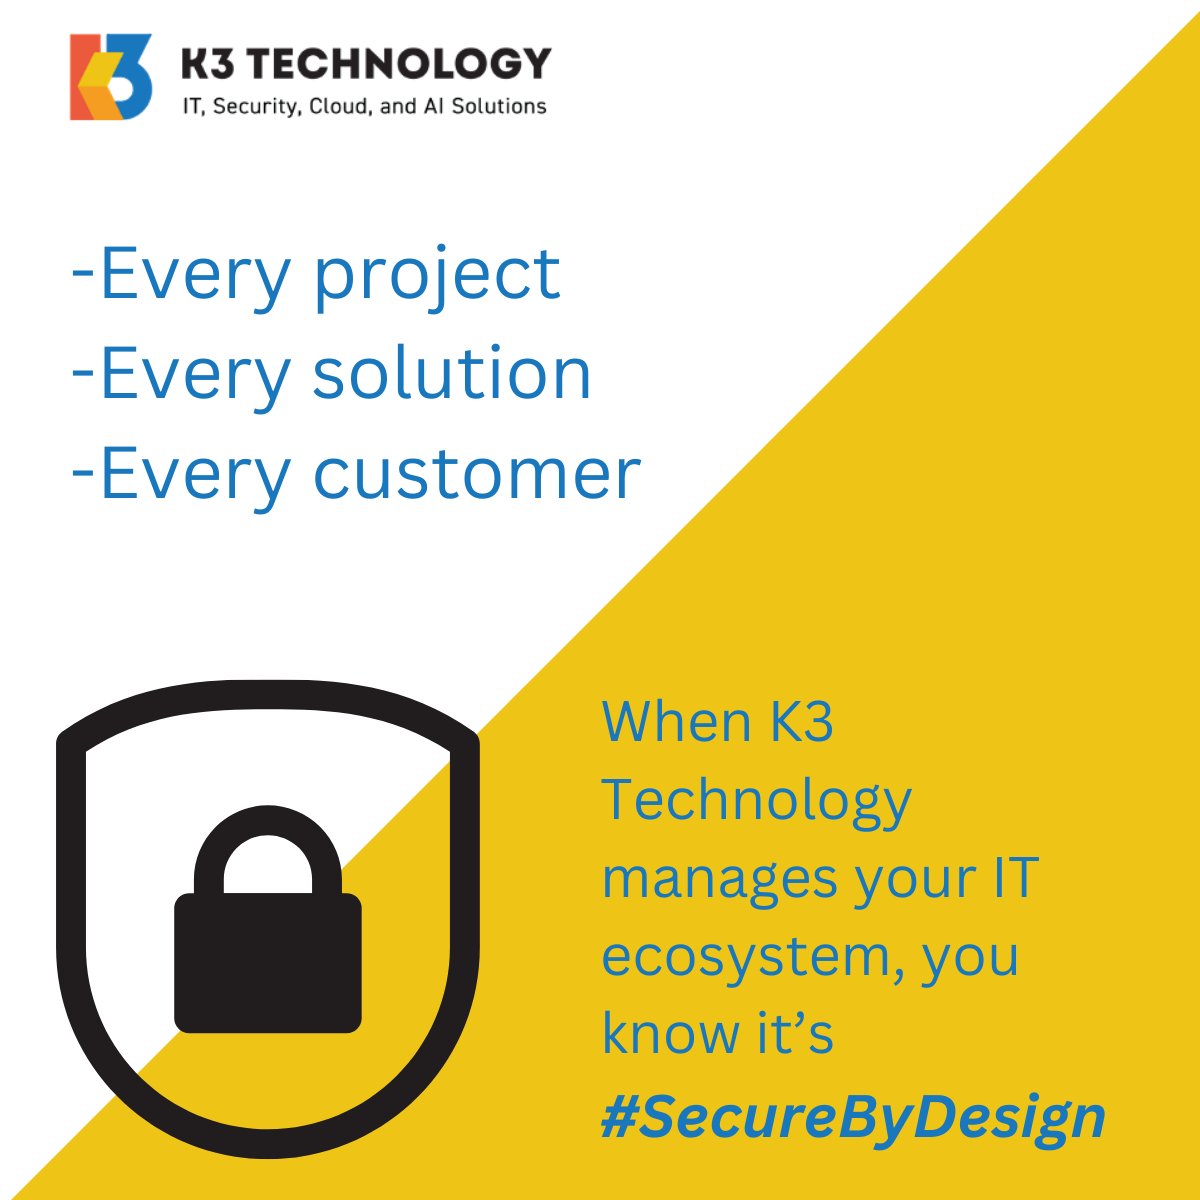 Your peace of mind is our blueprint. 

With K3 Technology, rest assured that every layer of your IT is #SecureByDesign. 
Learn more at: hubs.li/Q02tcWsn0

#Cybersecurity